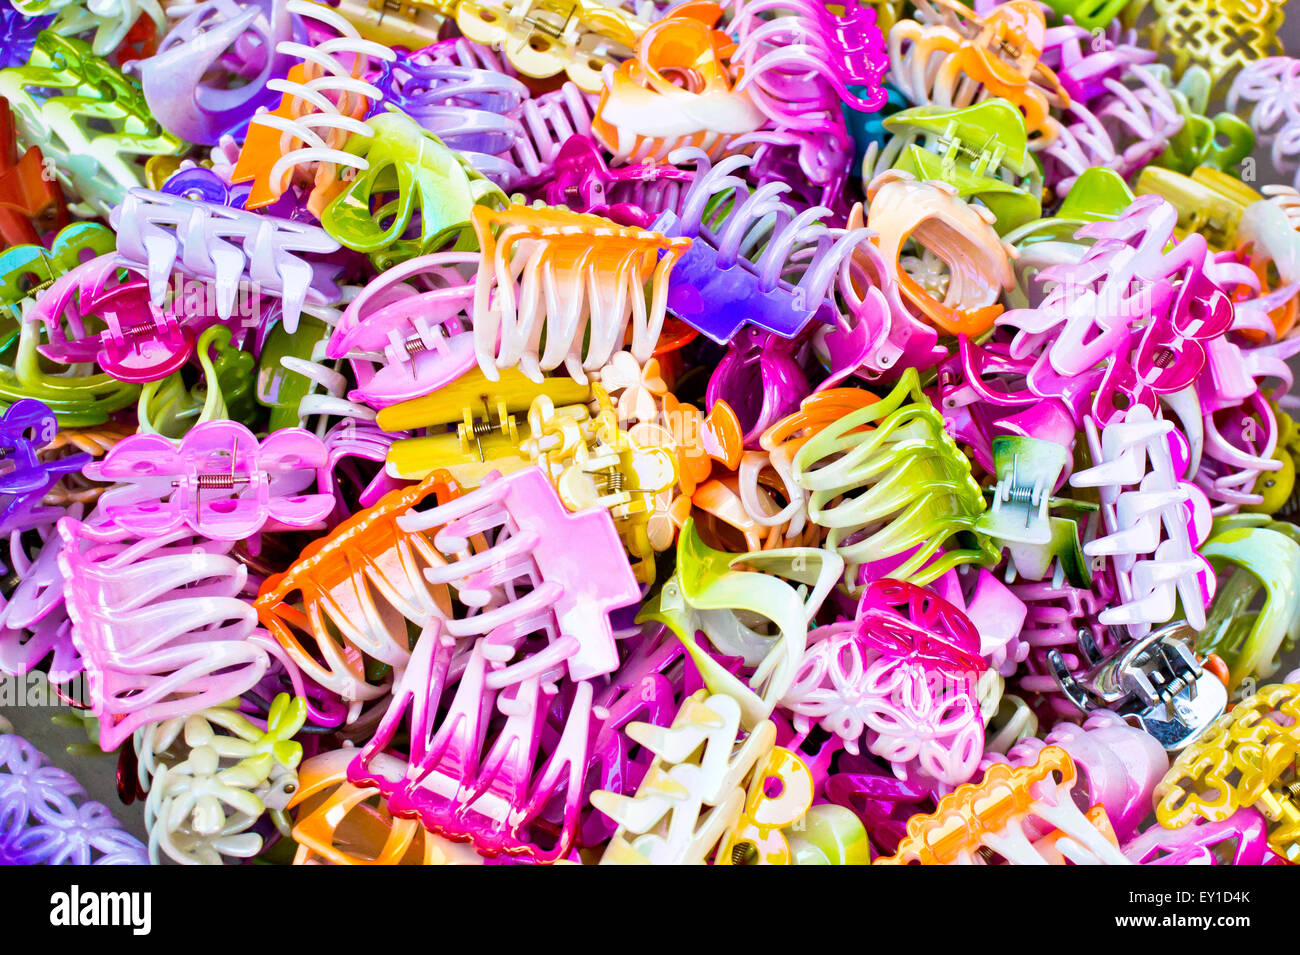 Colorful plastic hair clips as a background Stock Photo